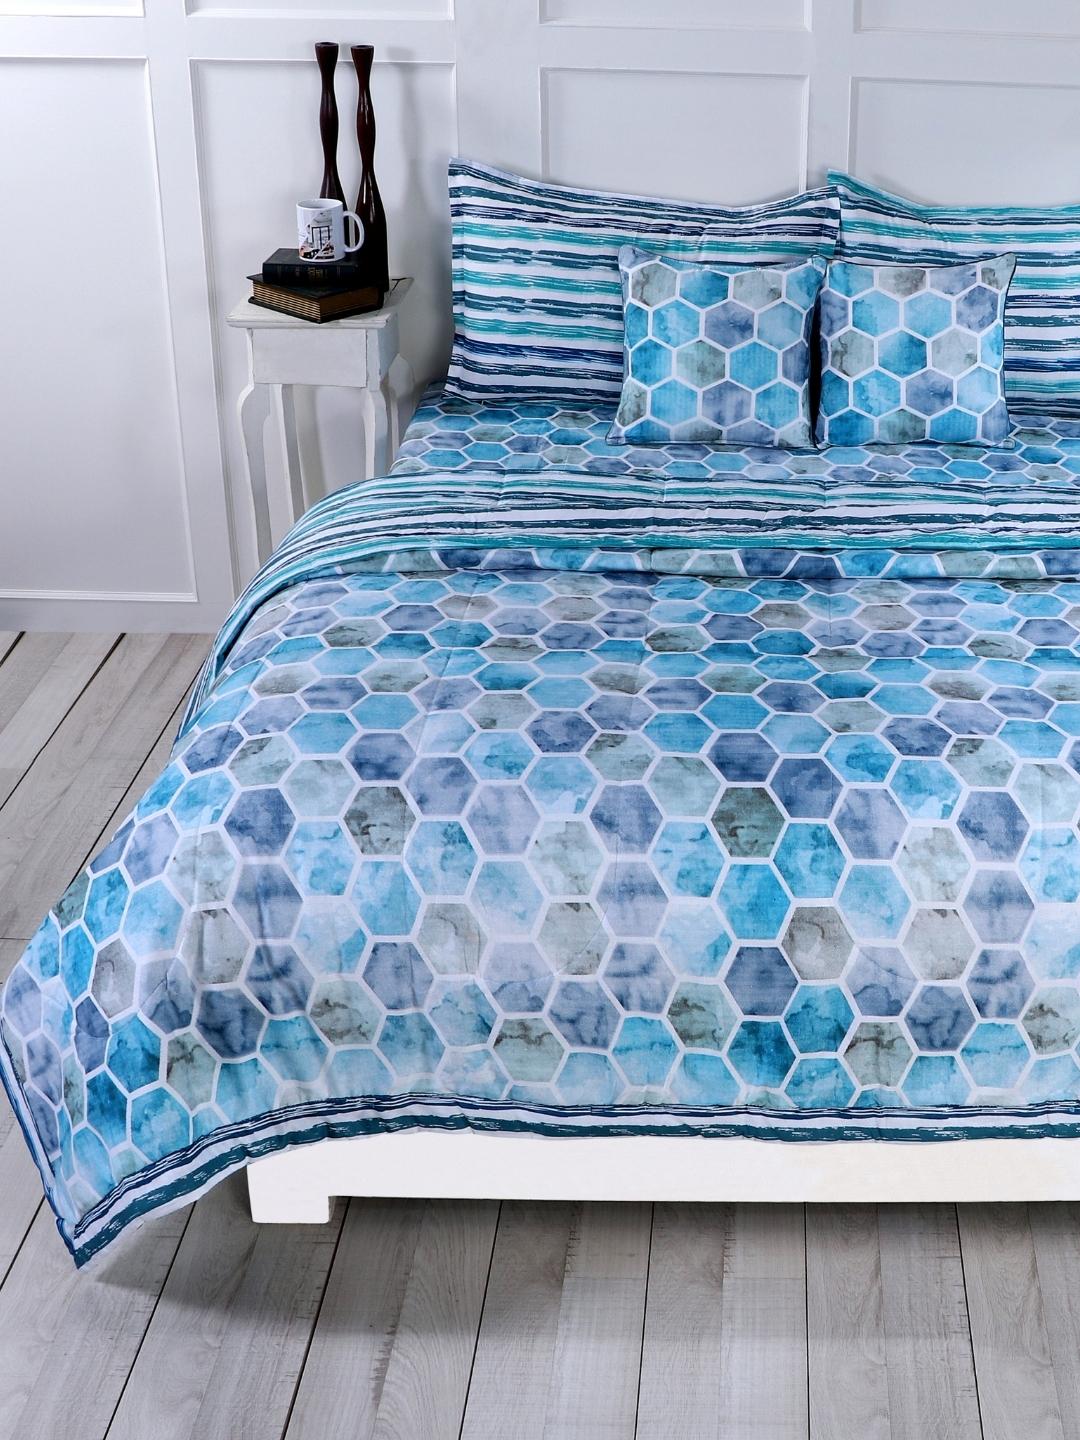 Cotton 6 Pcs Double Bed Bedding Set-Blue and Grey-Turquoise Blue